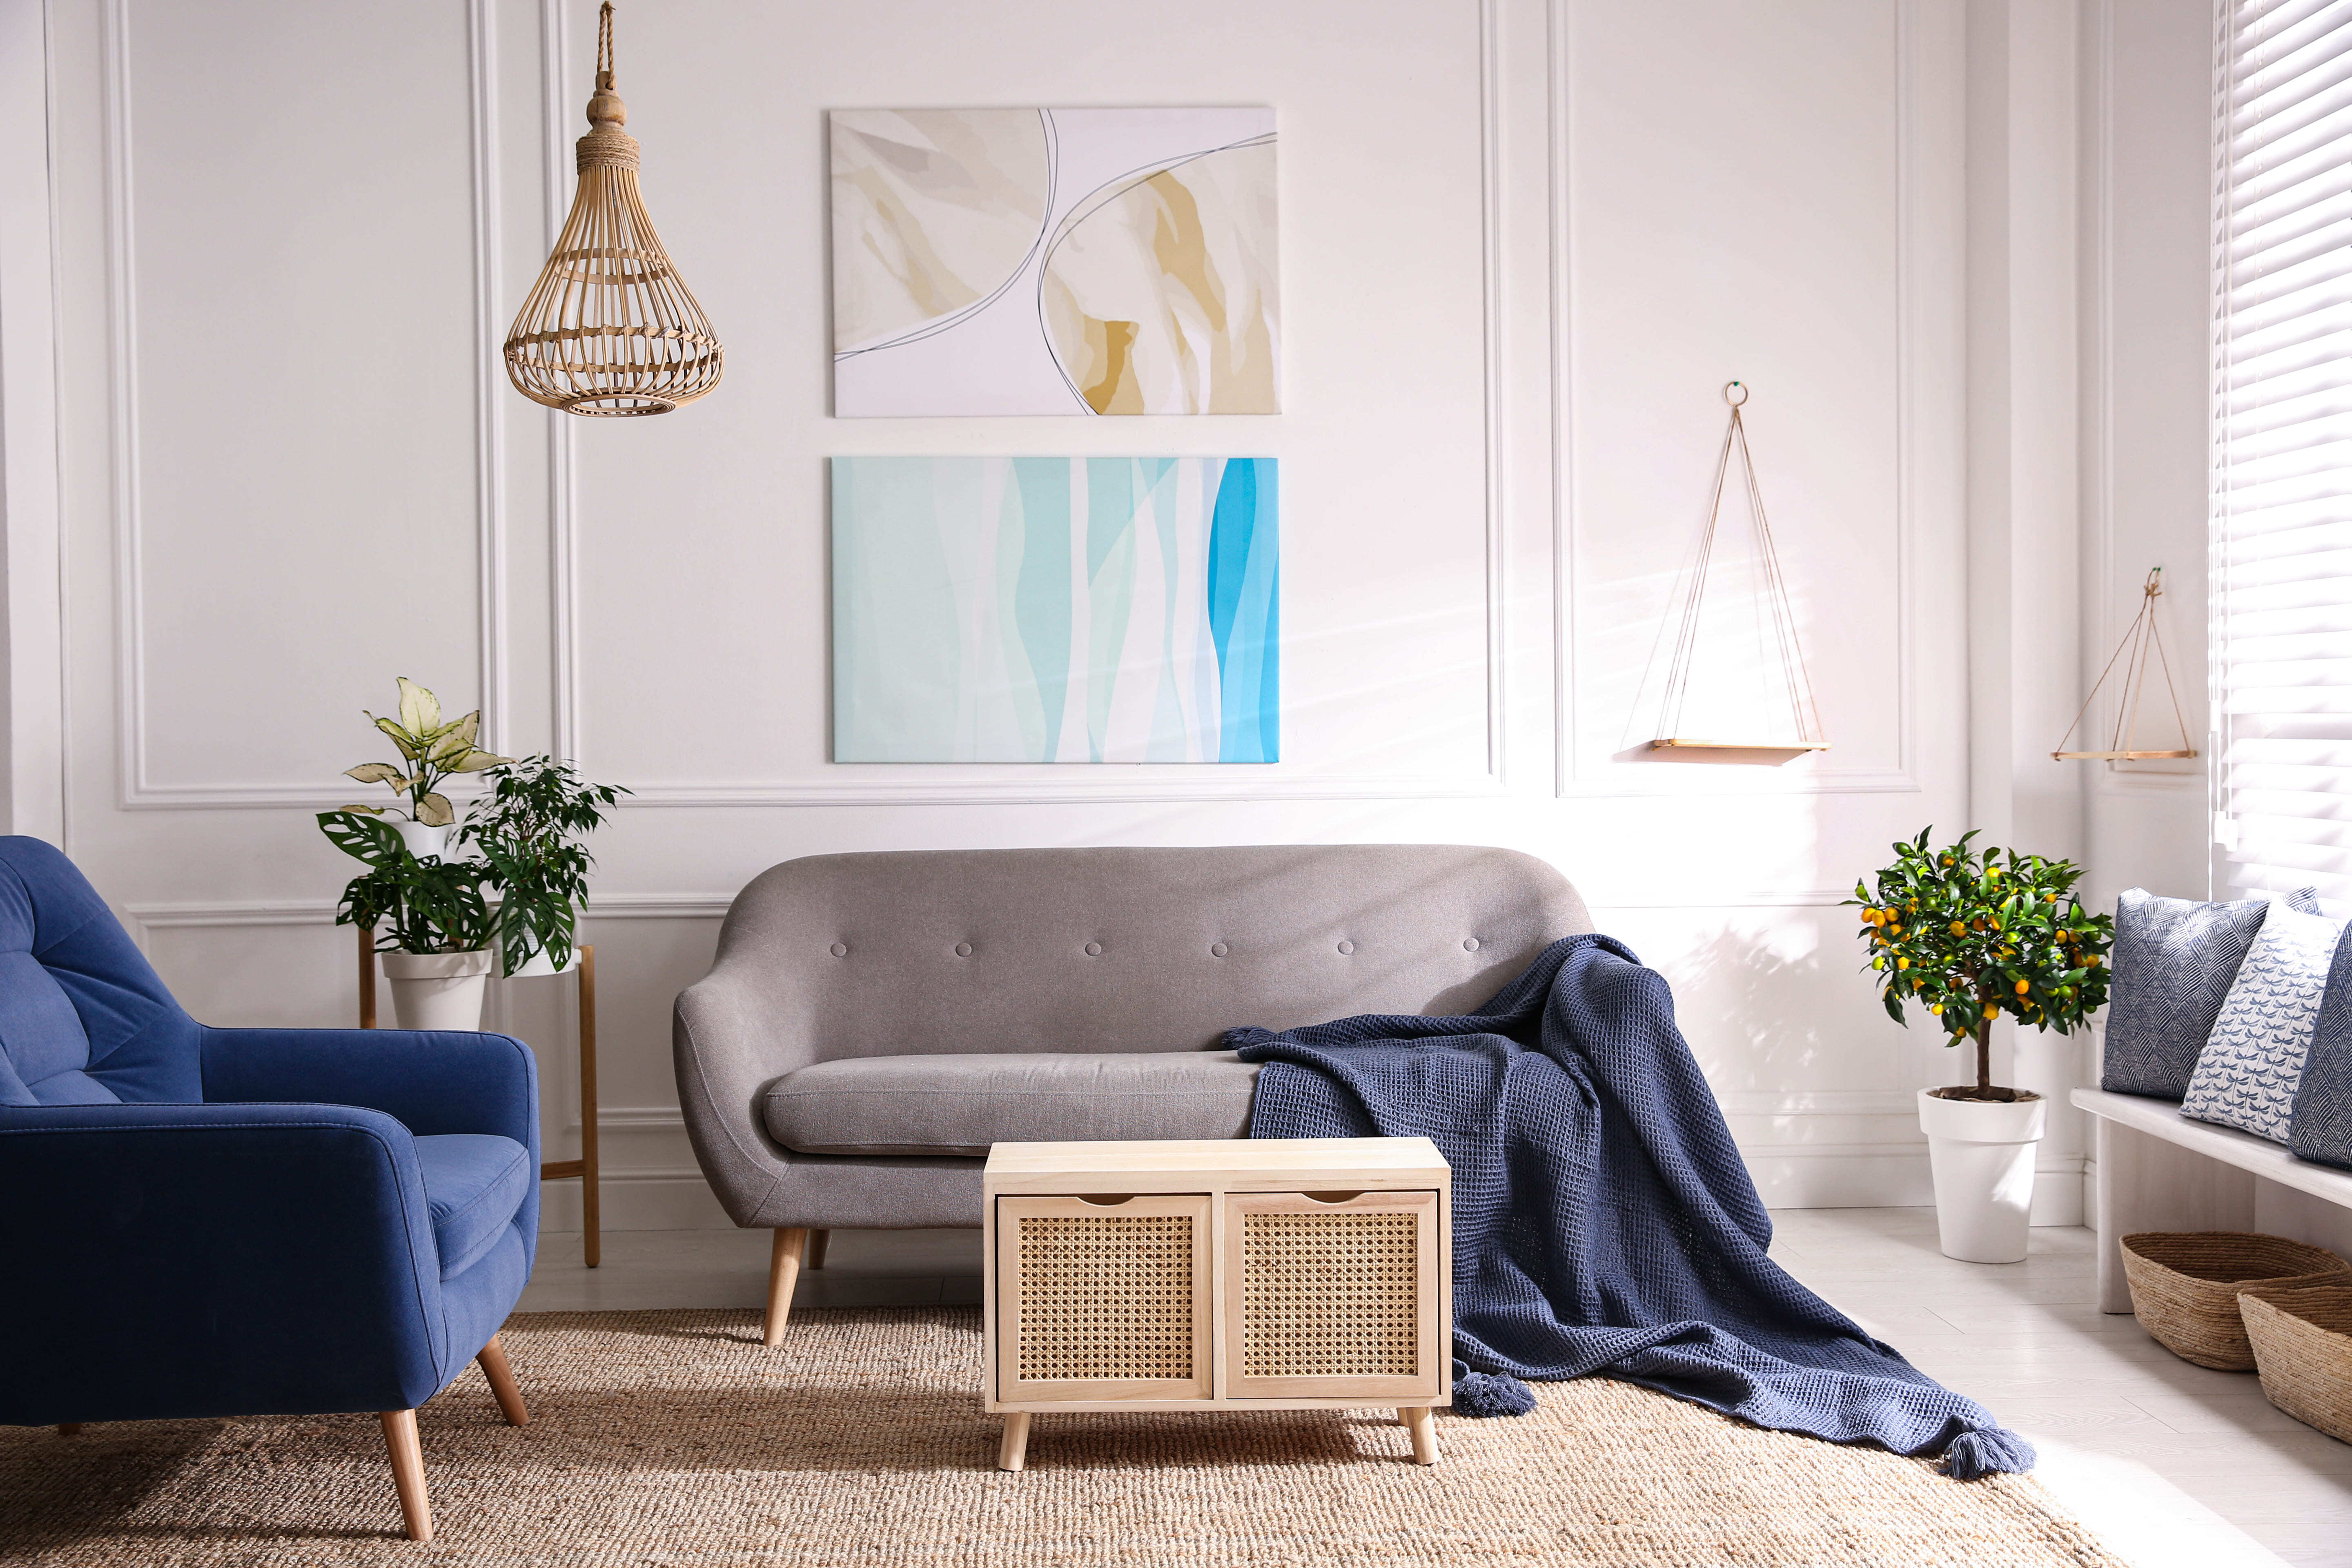 Light and Neutral Colors for a Calm living room 